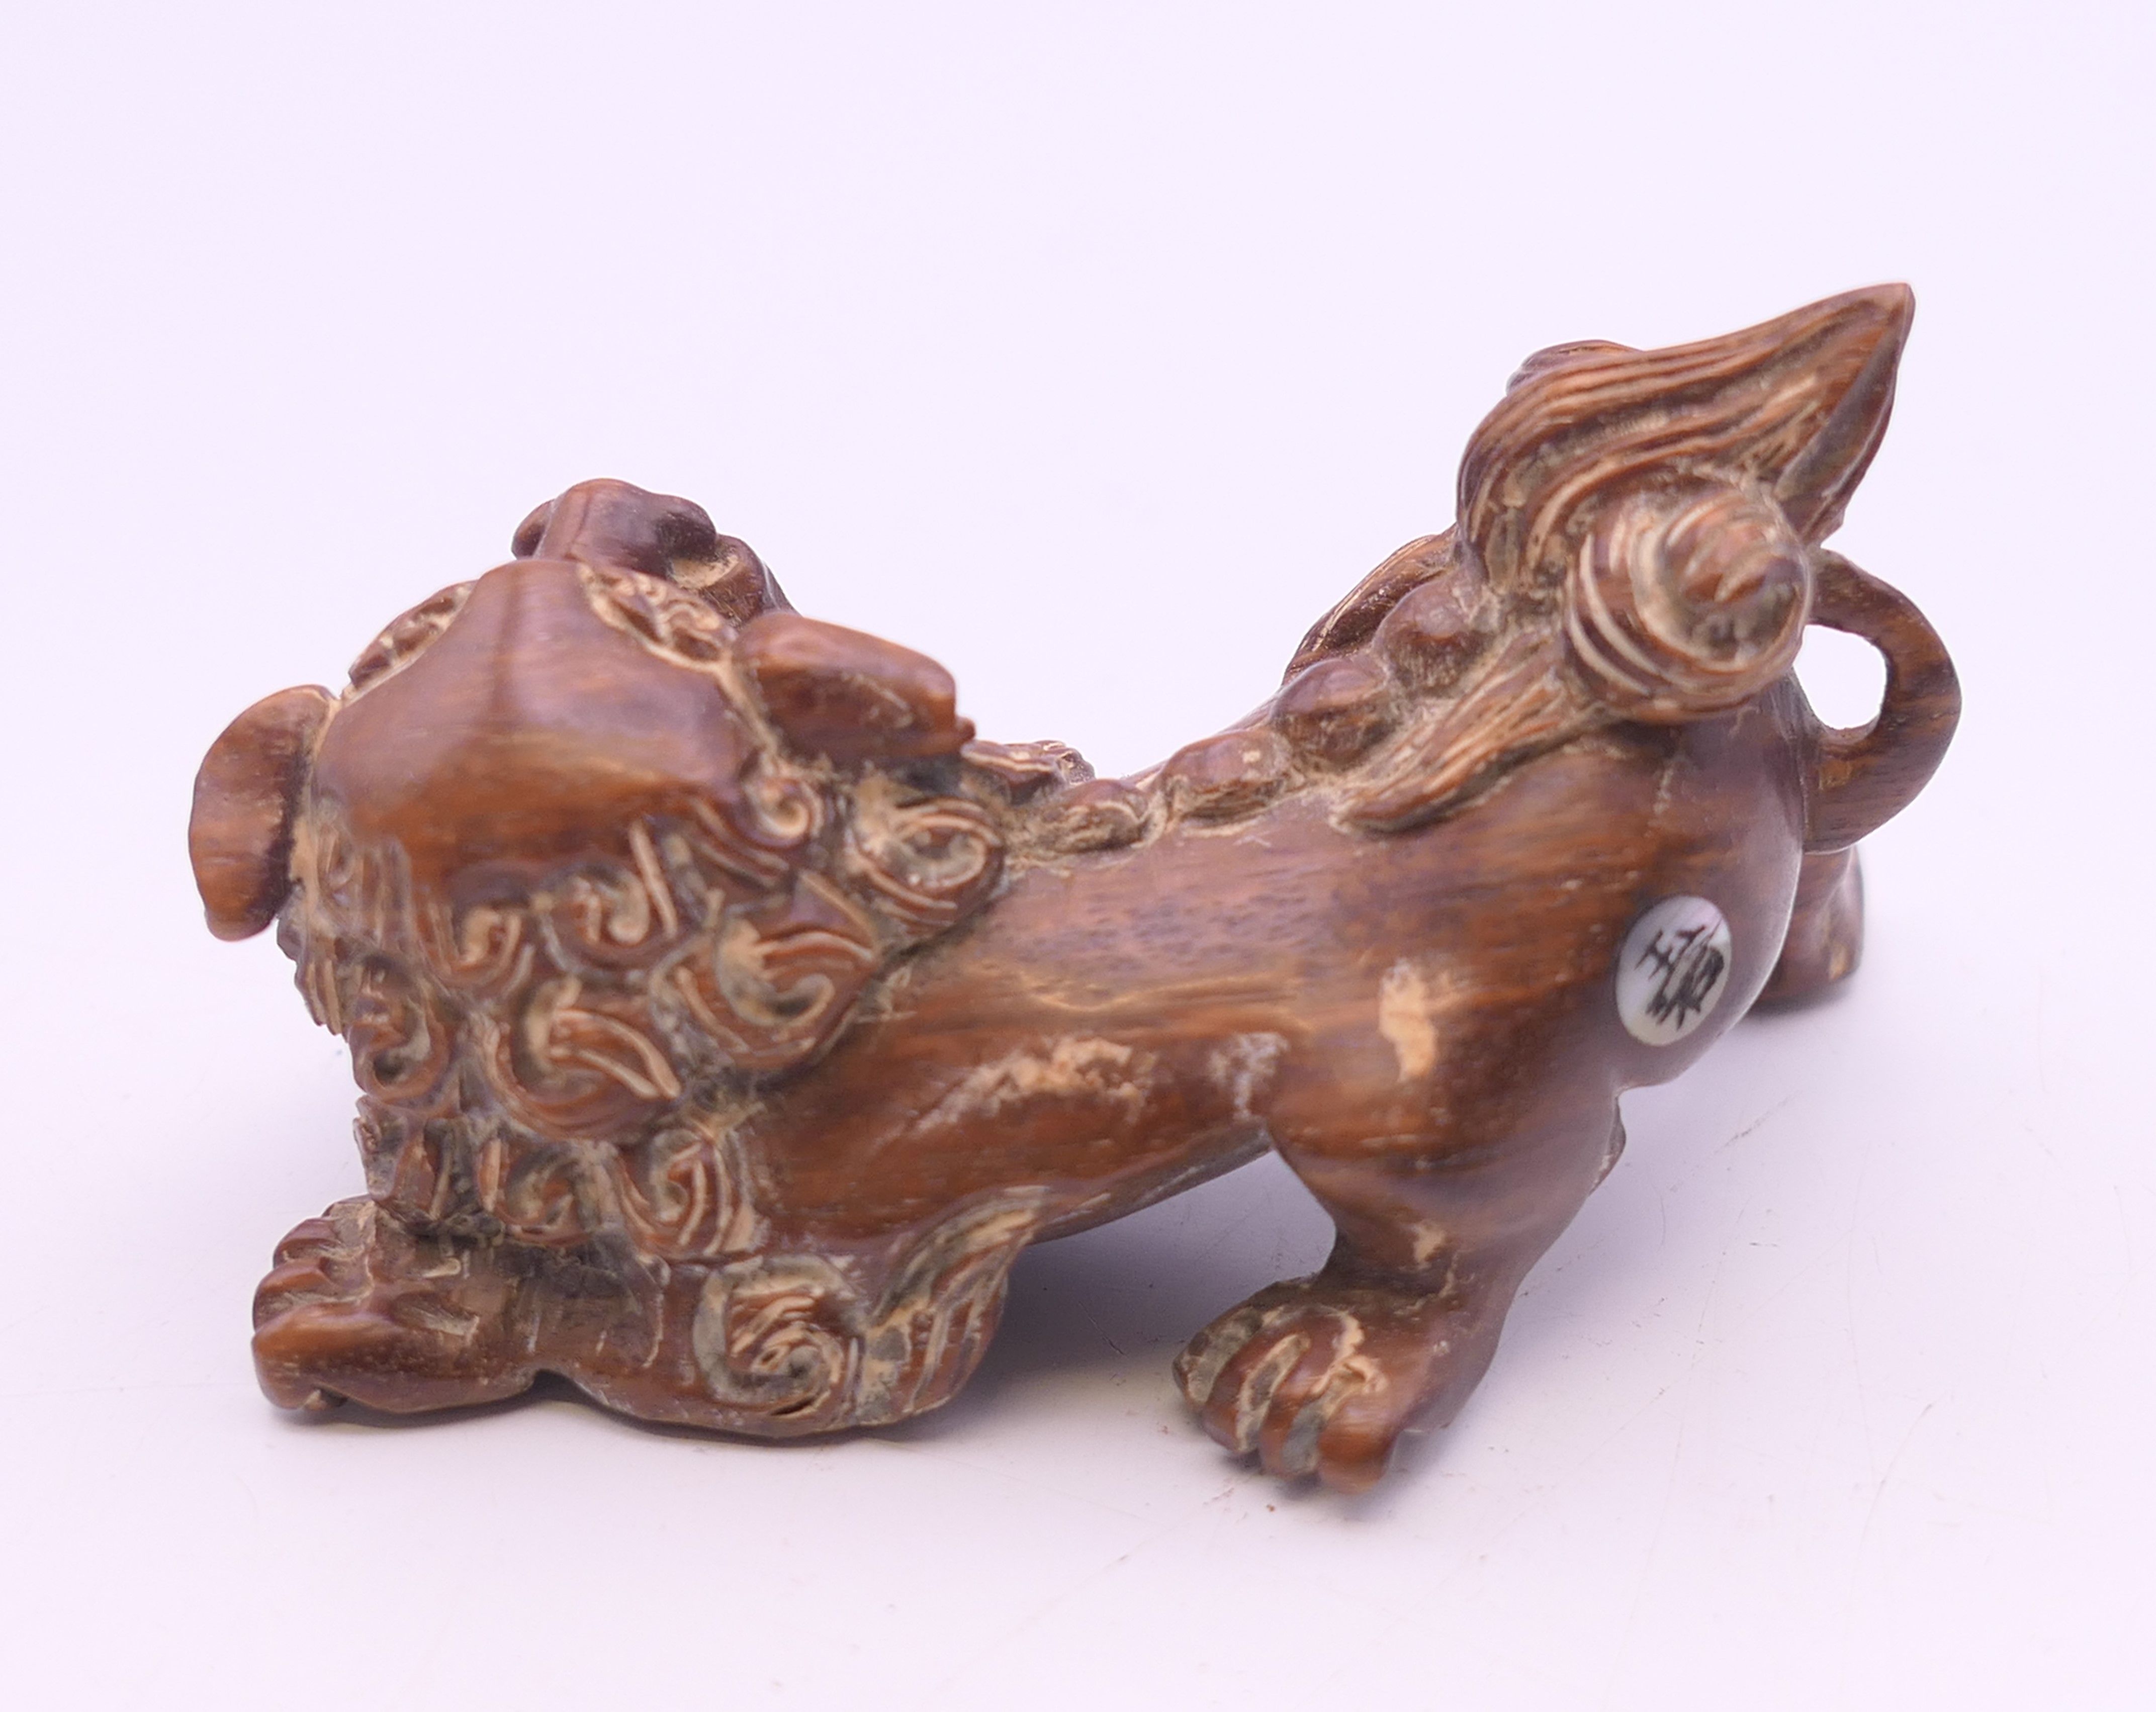 A wooden dog-of-fo. 5.5 cm long. - Image 2 of 4